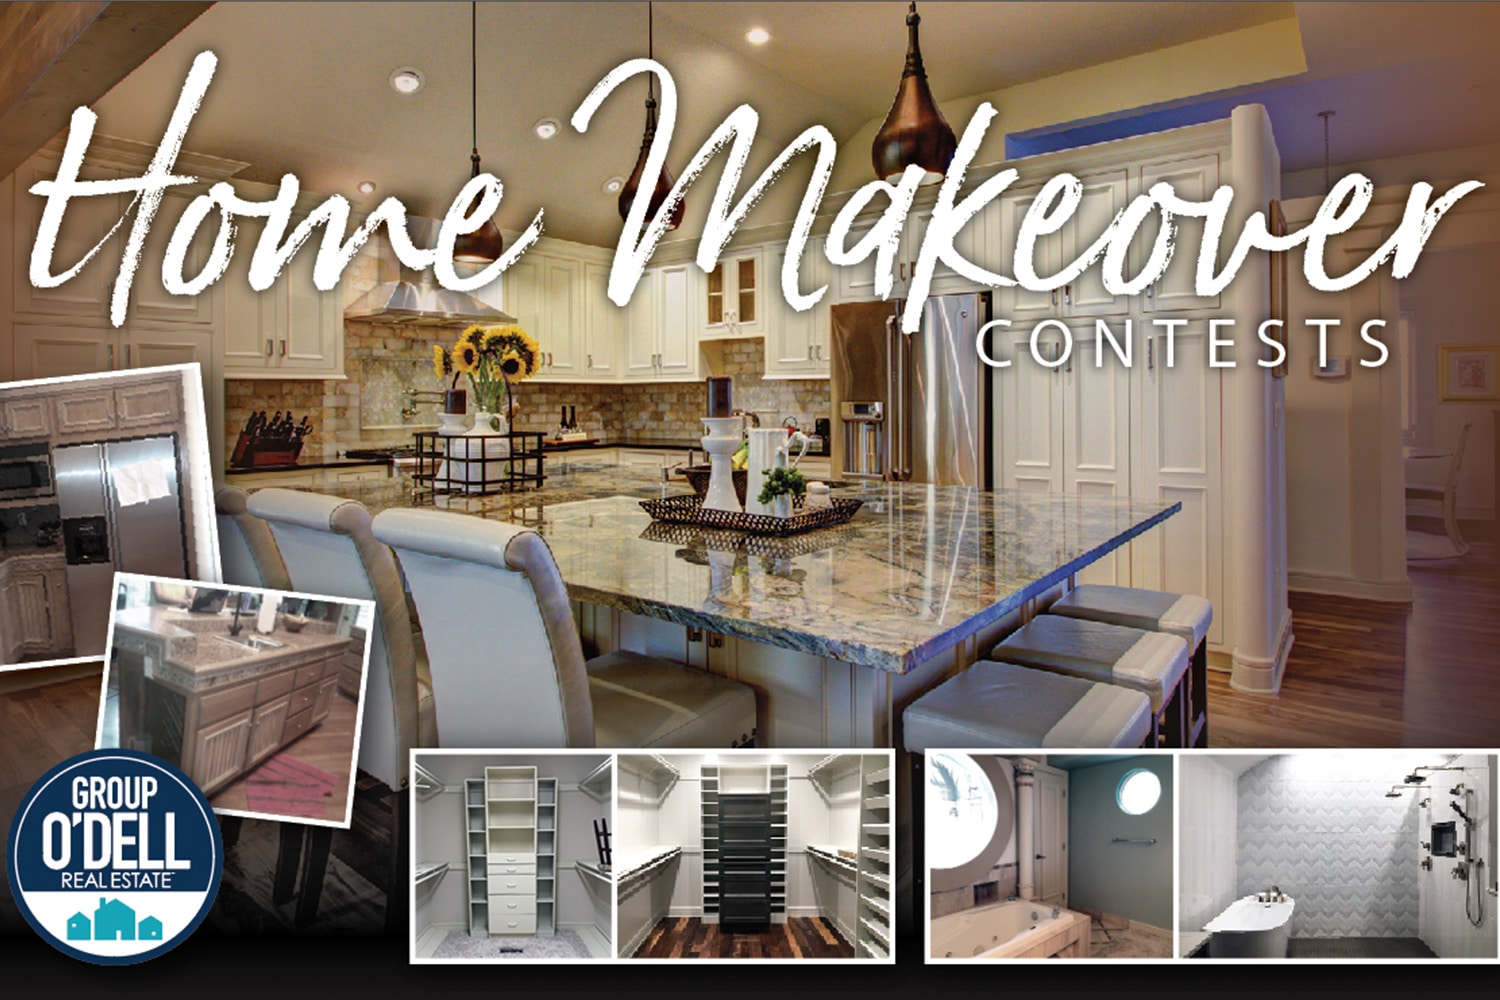 Home Makeover Contest And the winner is... Group O'Dell